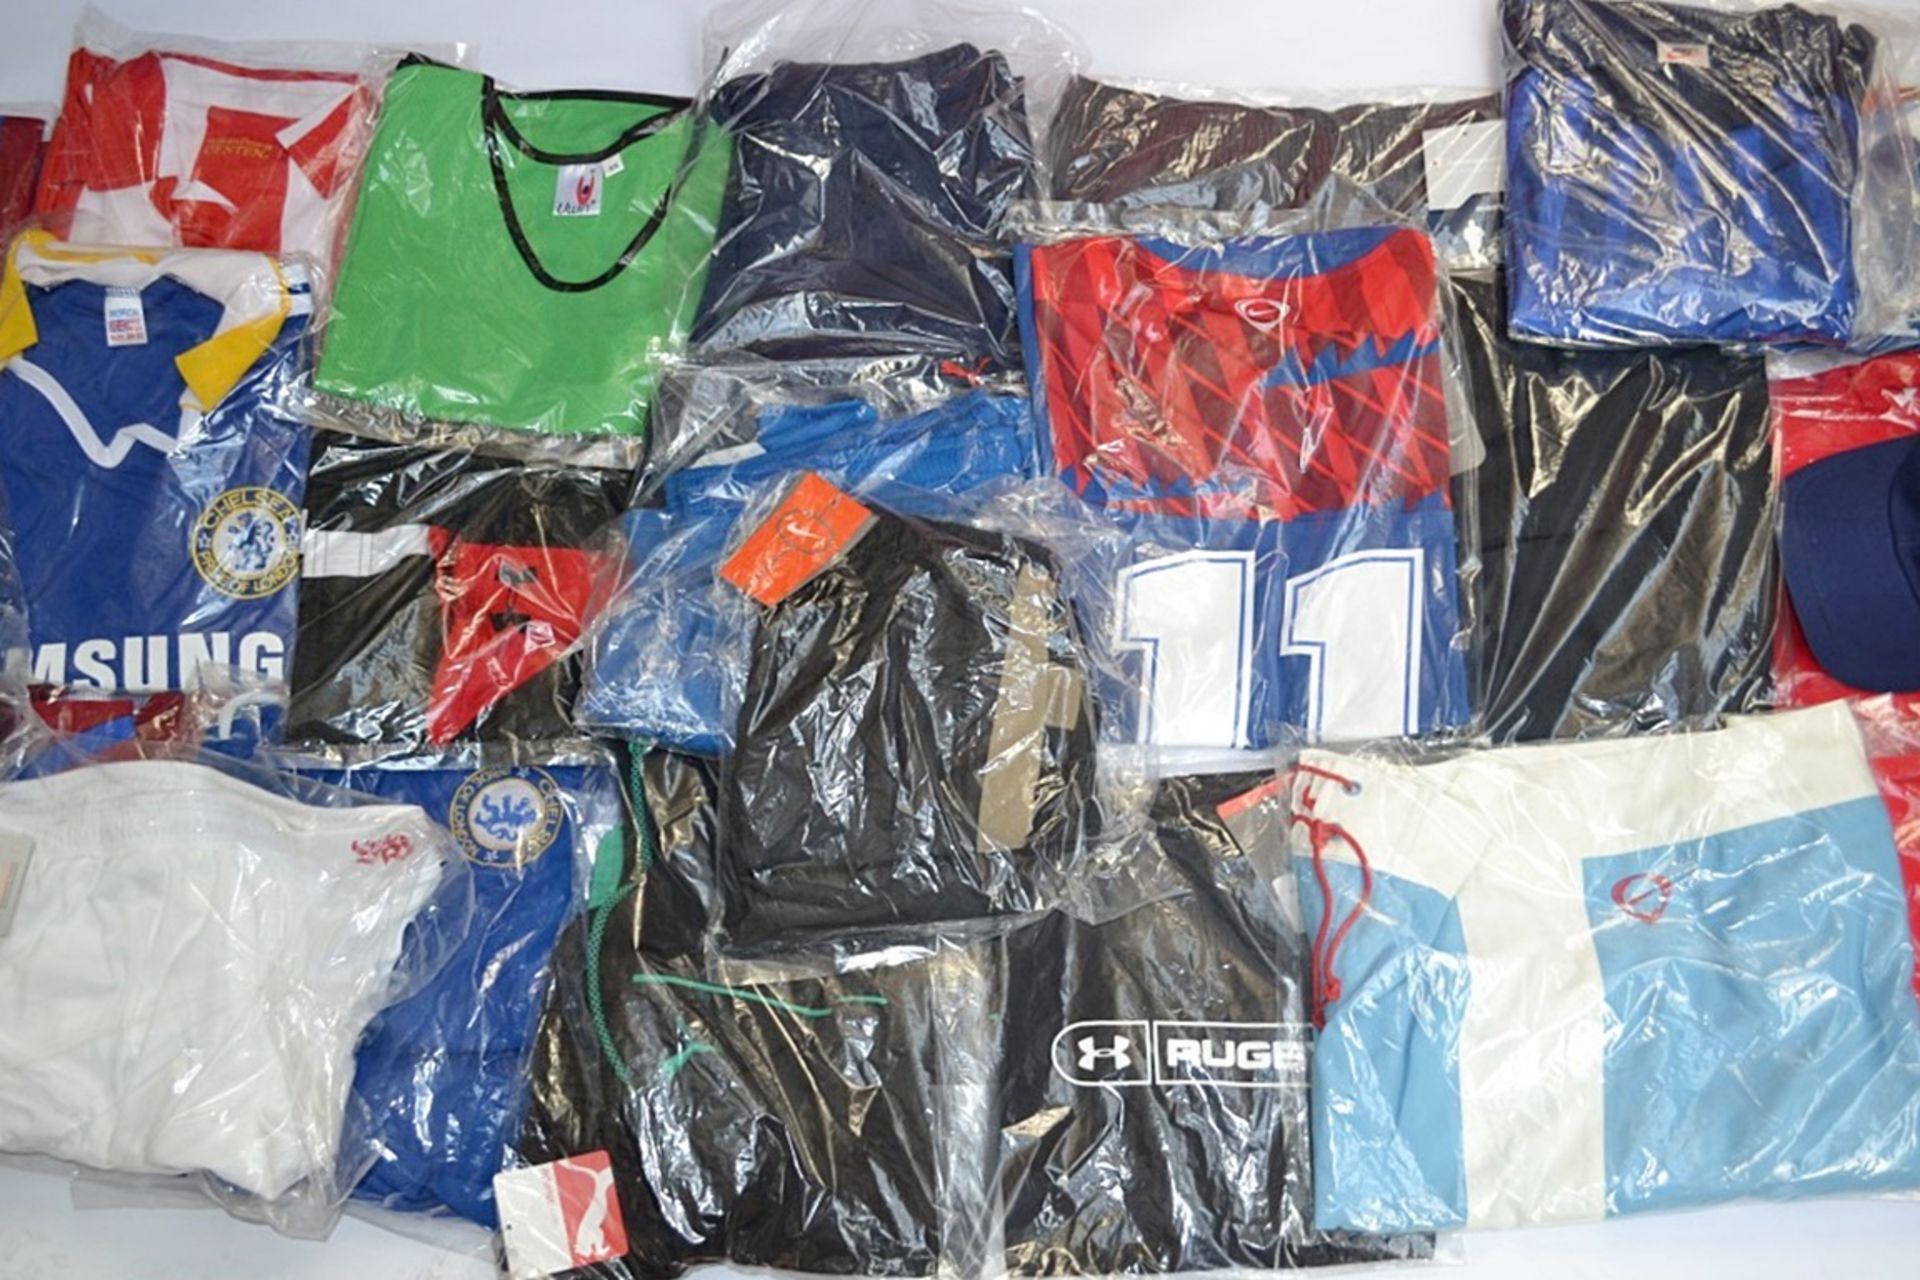 25 x Assorted Items Of Branded and Non-branded Sportswear Including Puma, Nike & Champion - Sizes: